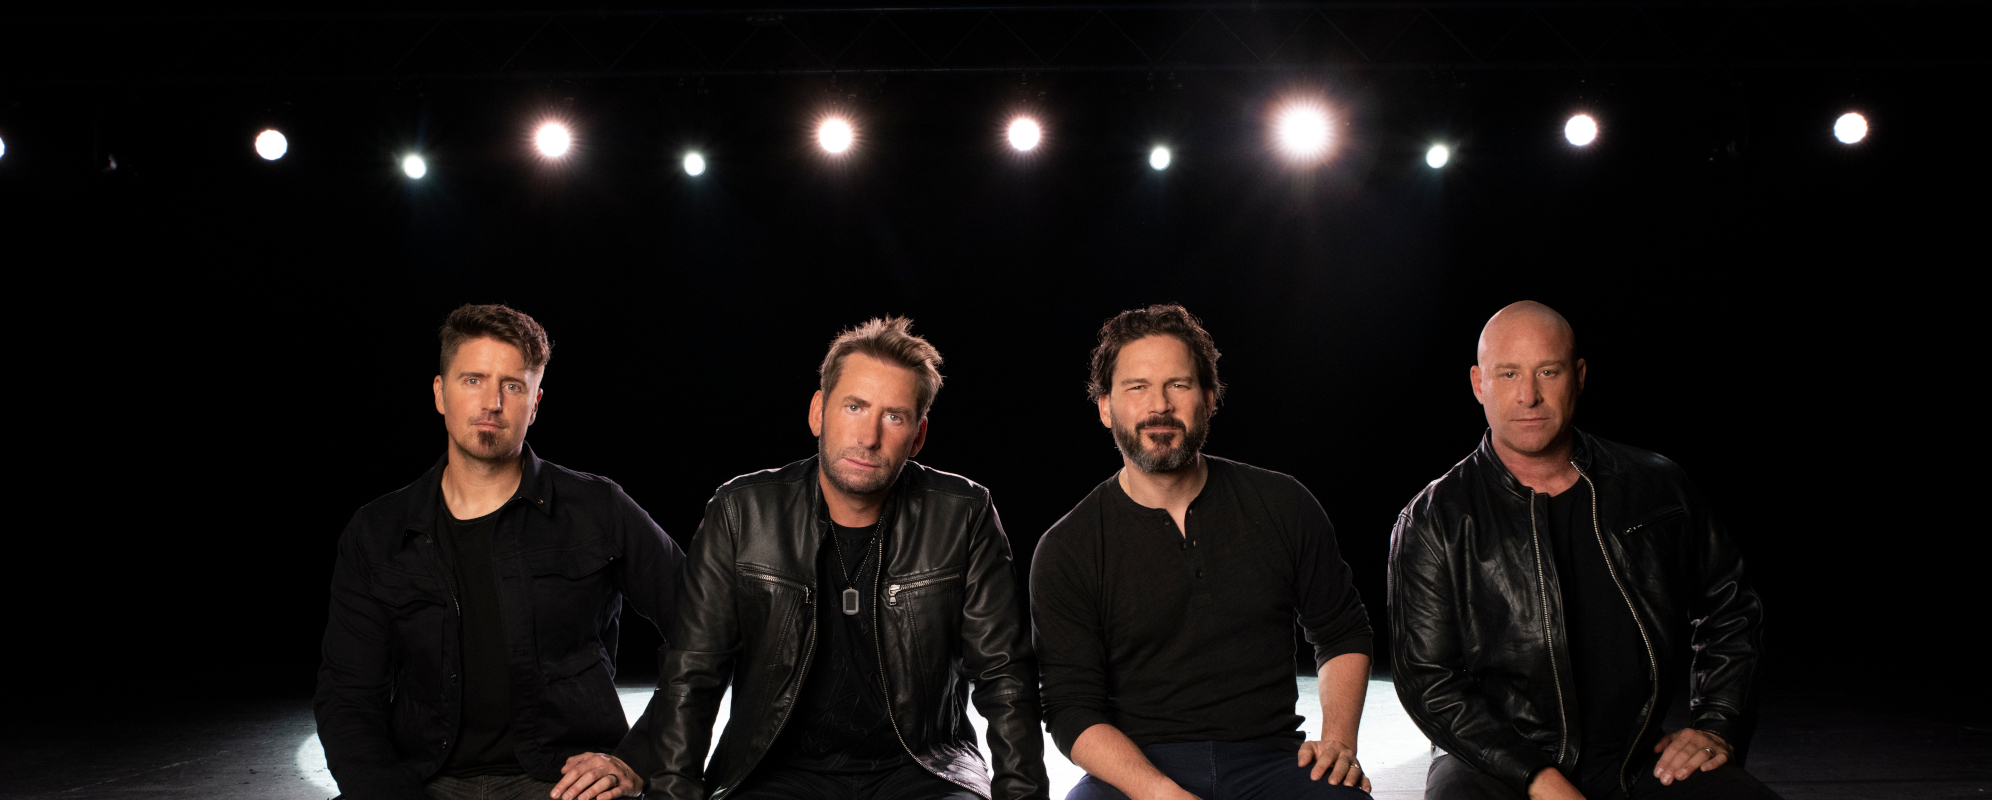 Nickelback Shares New Single “Those Days” Ahead of New LP Release